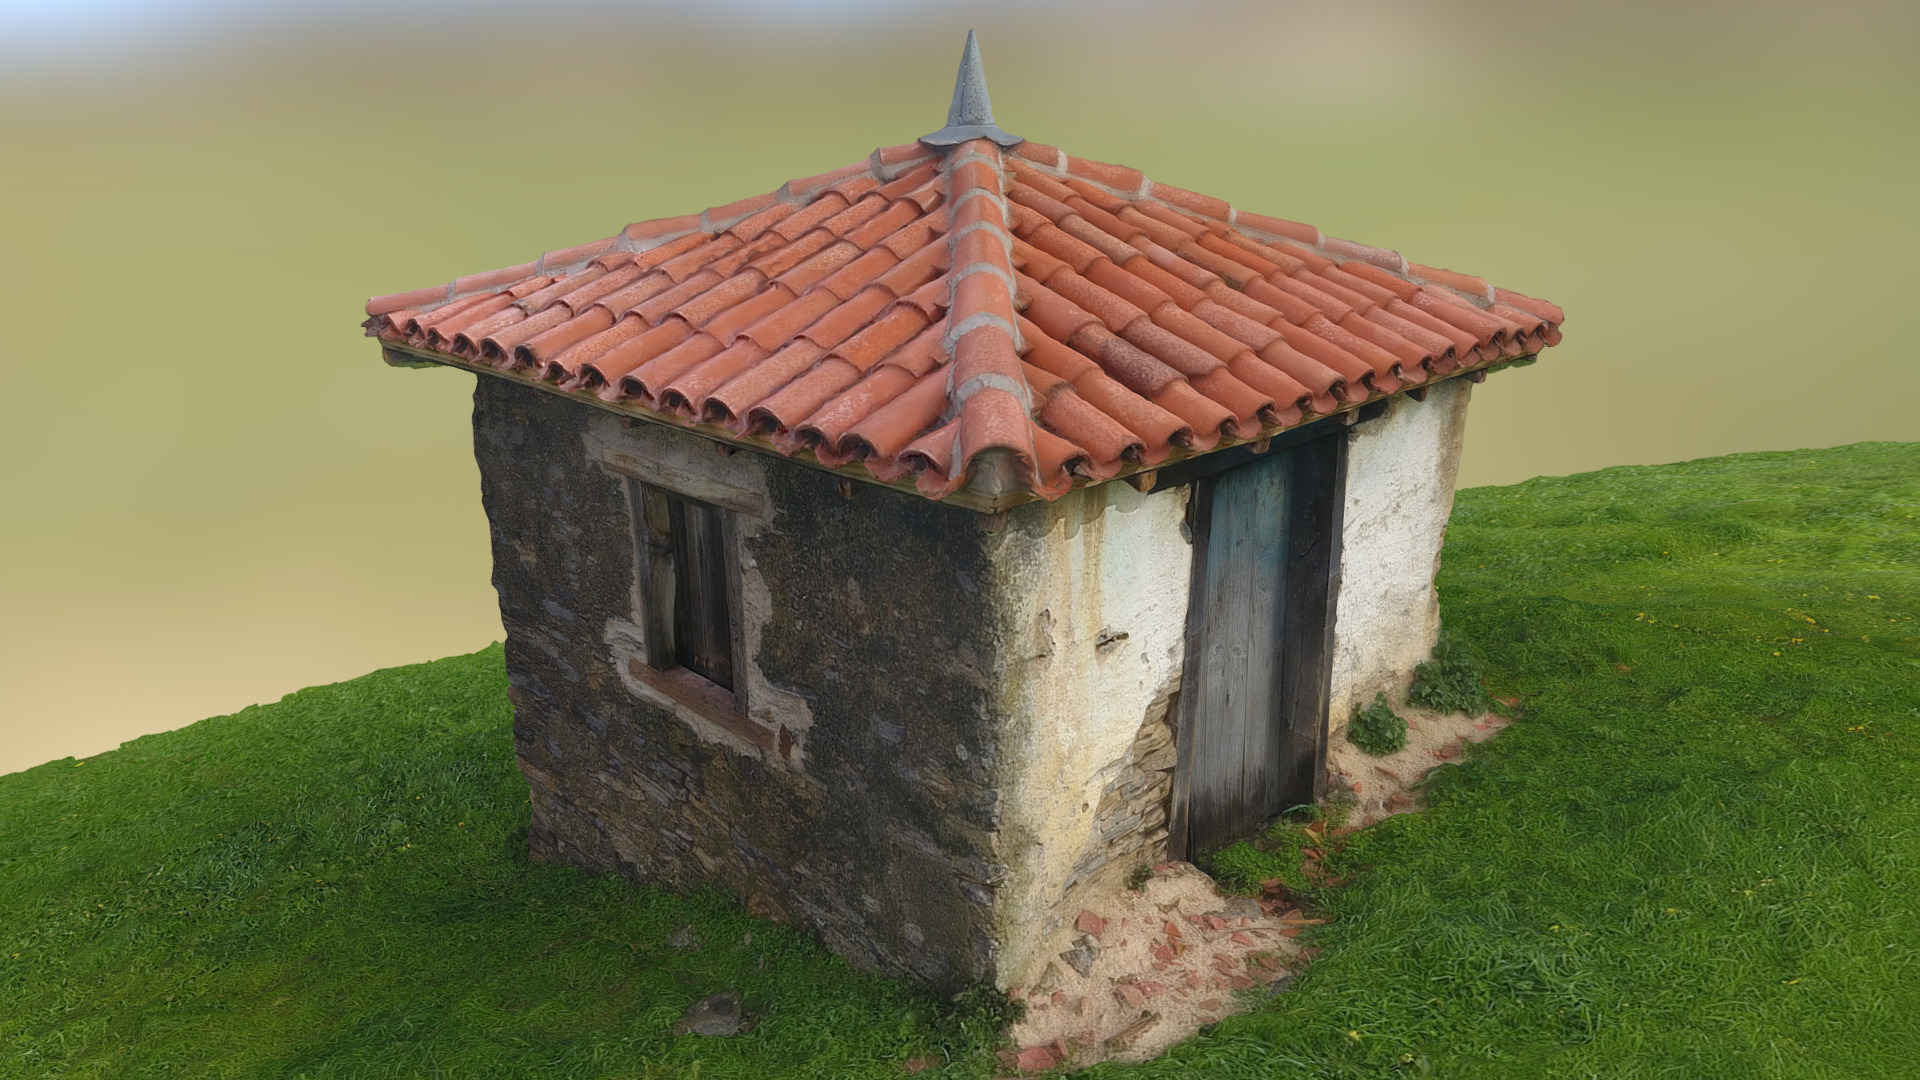 3D model Cabane de berger - This is a 3D model of the Cabane de berger. The 3D model is about a small house in a grassy field.